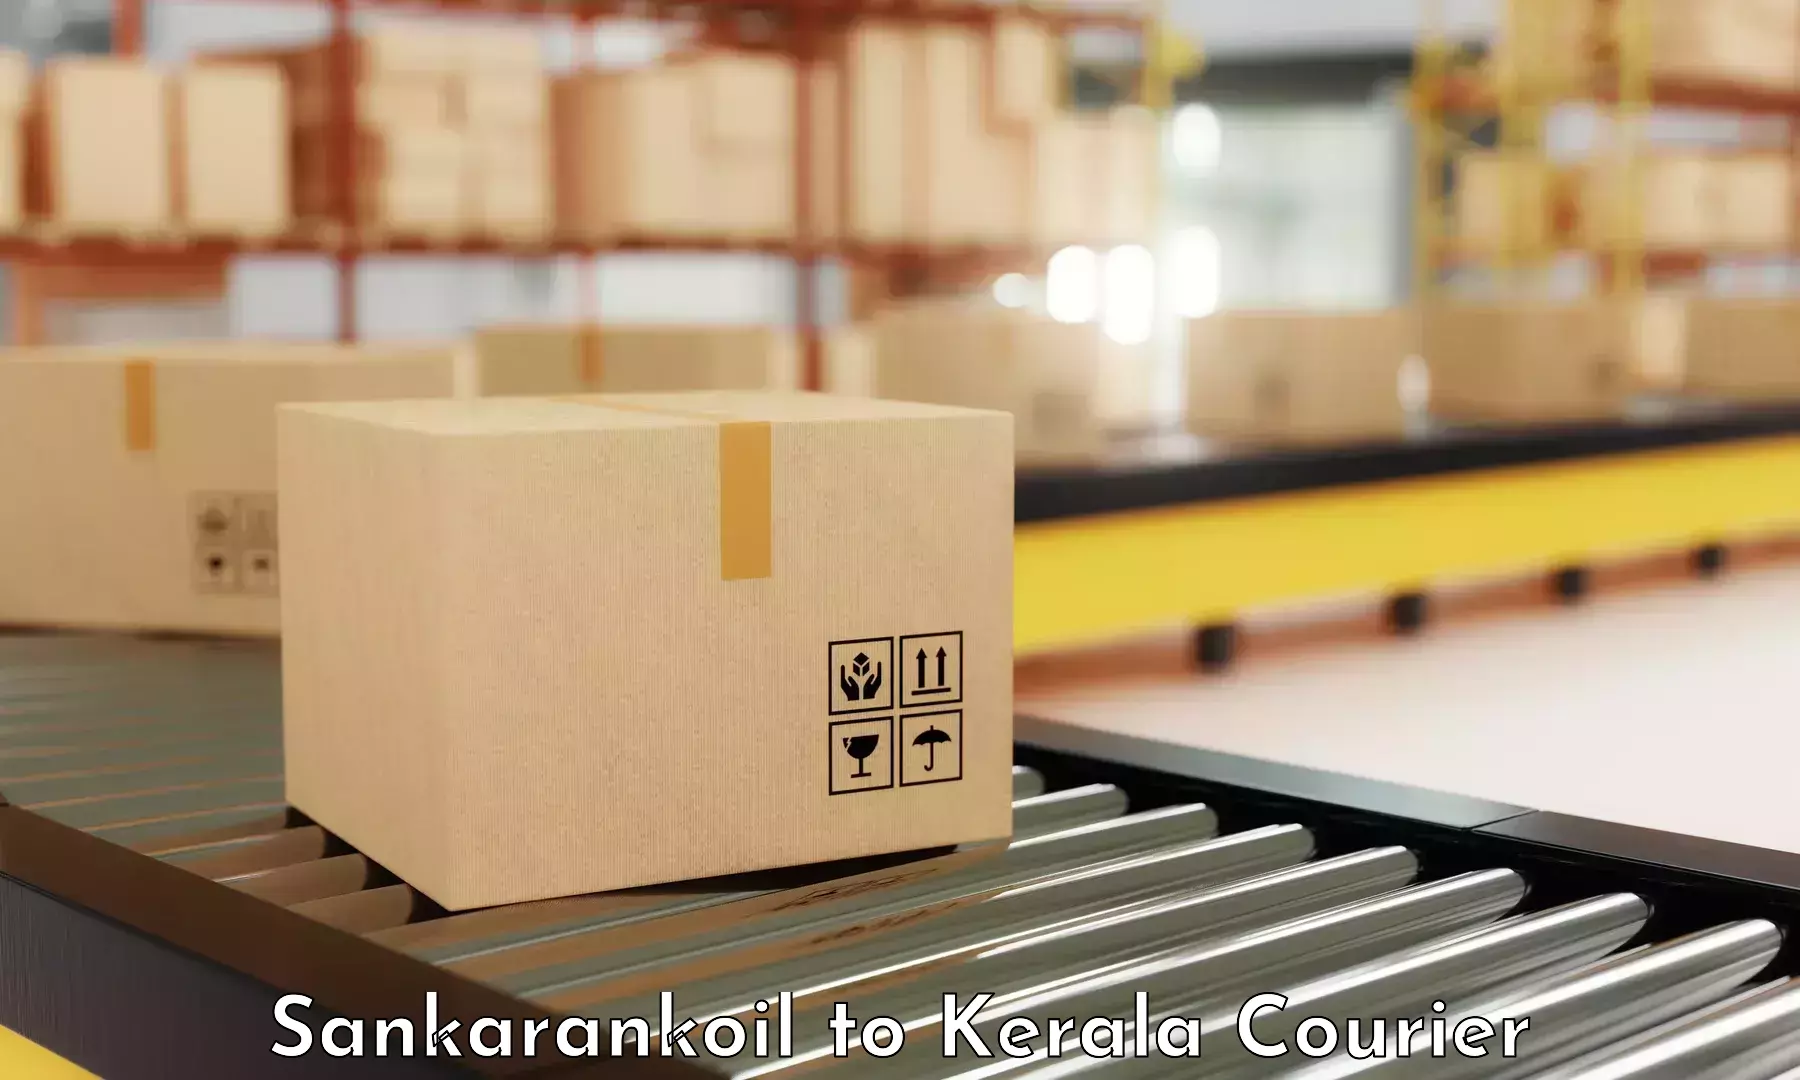 State-of-the-art courier technology Sankarankoil to Kerala